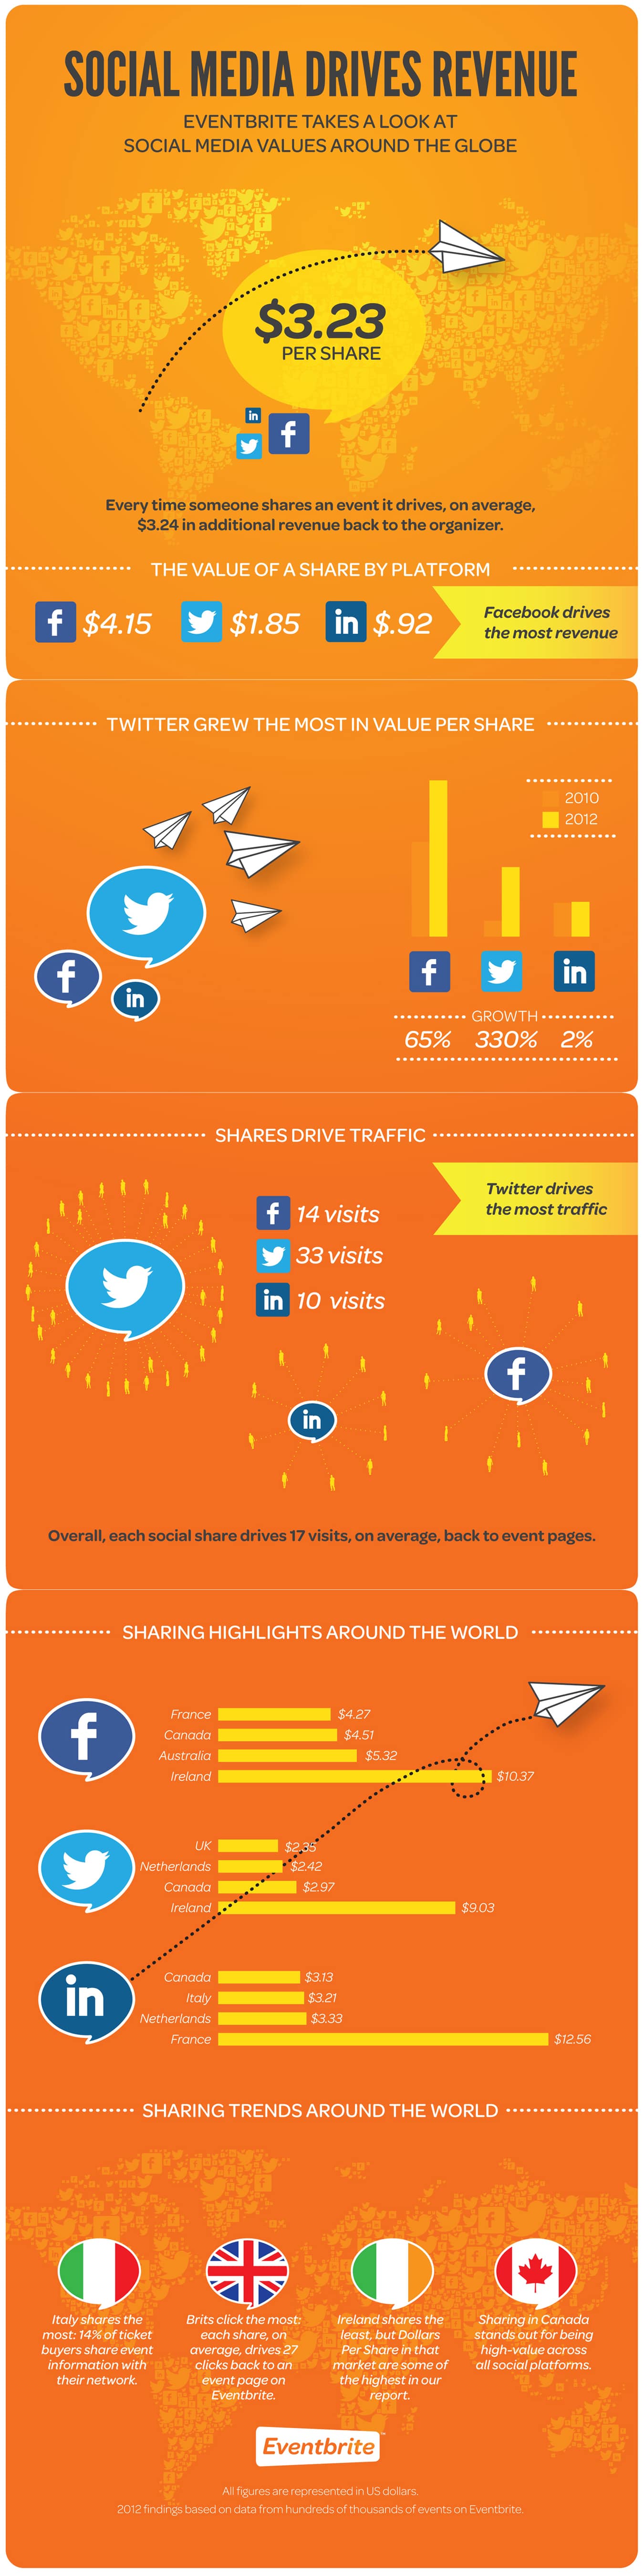 Dollar Value Of Social Media Shares & How It’s Changed [Infographic]